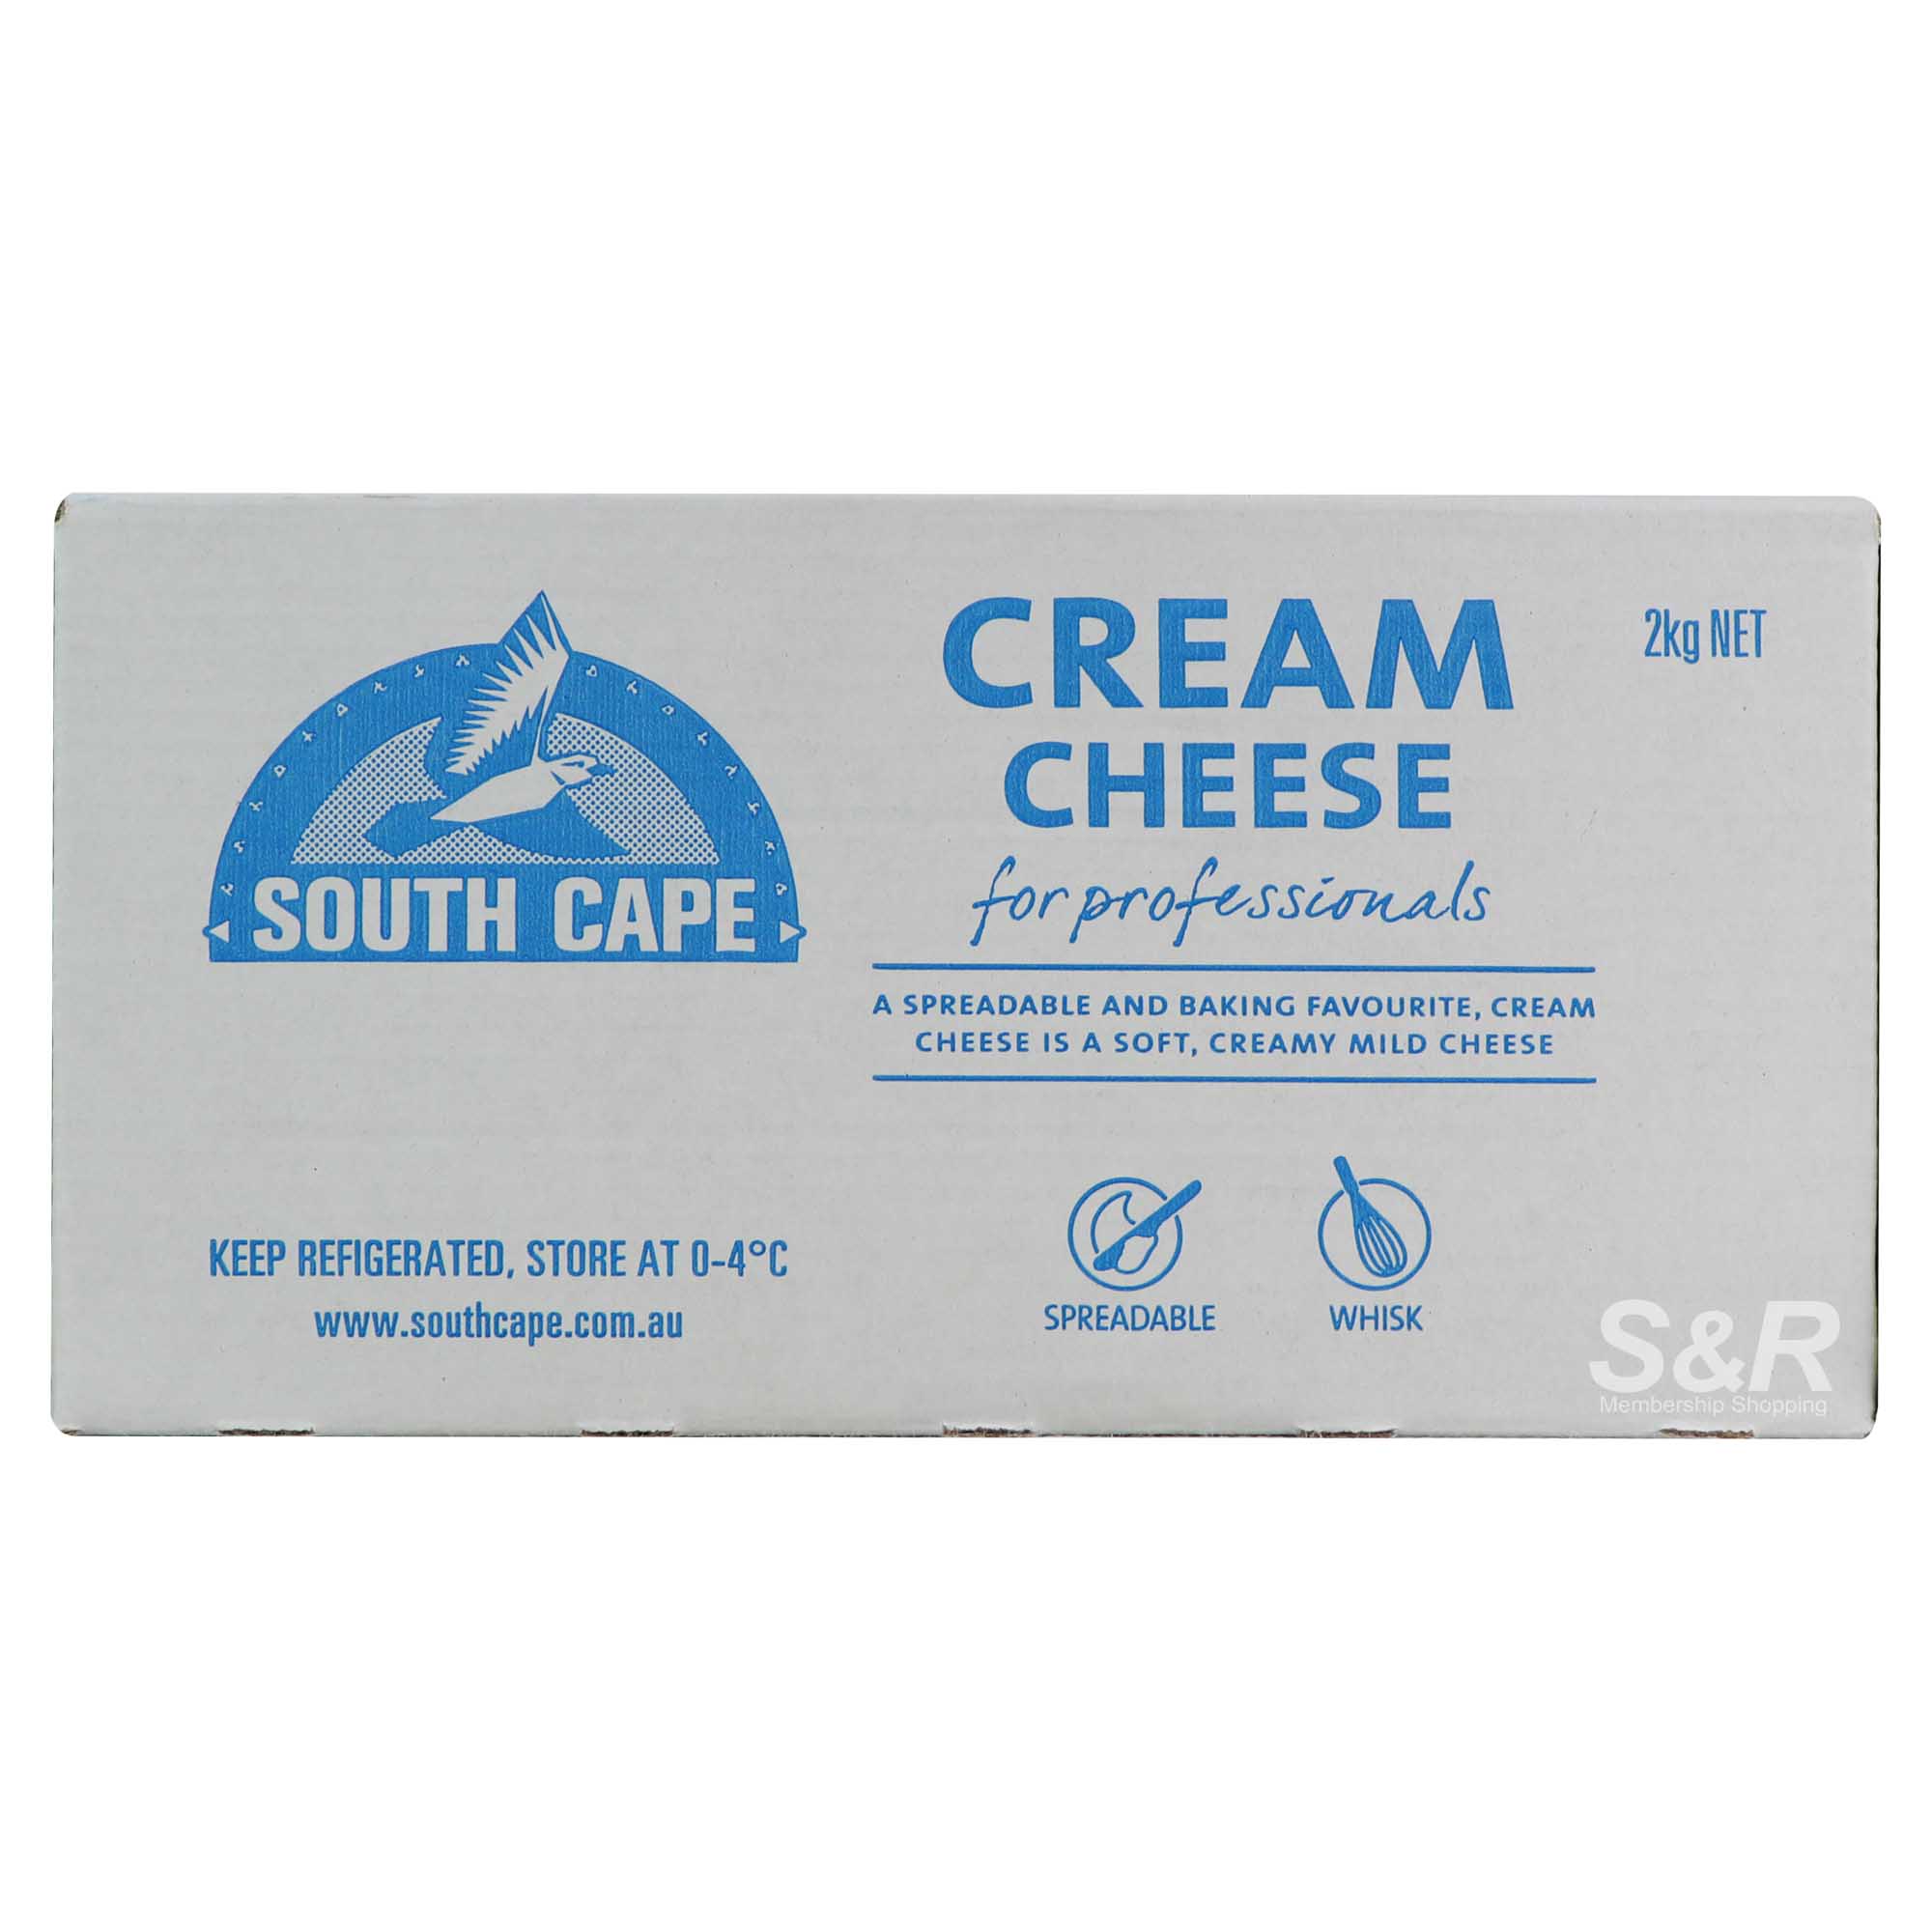 South Cape Cream Cheese For Professionals 2kg